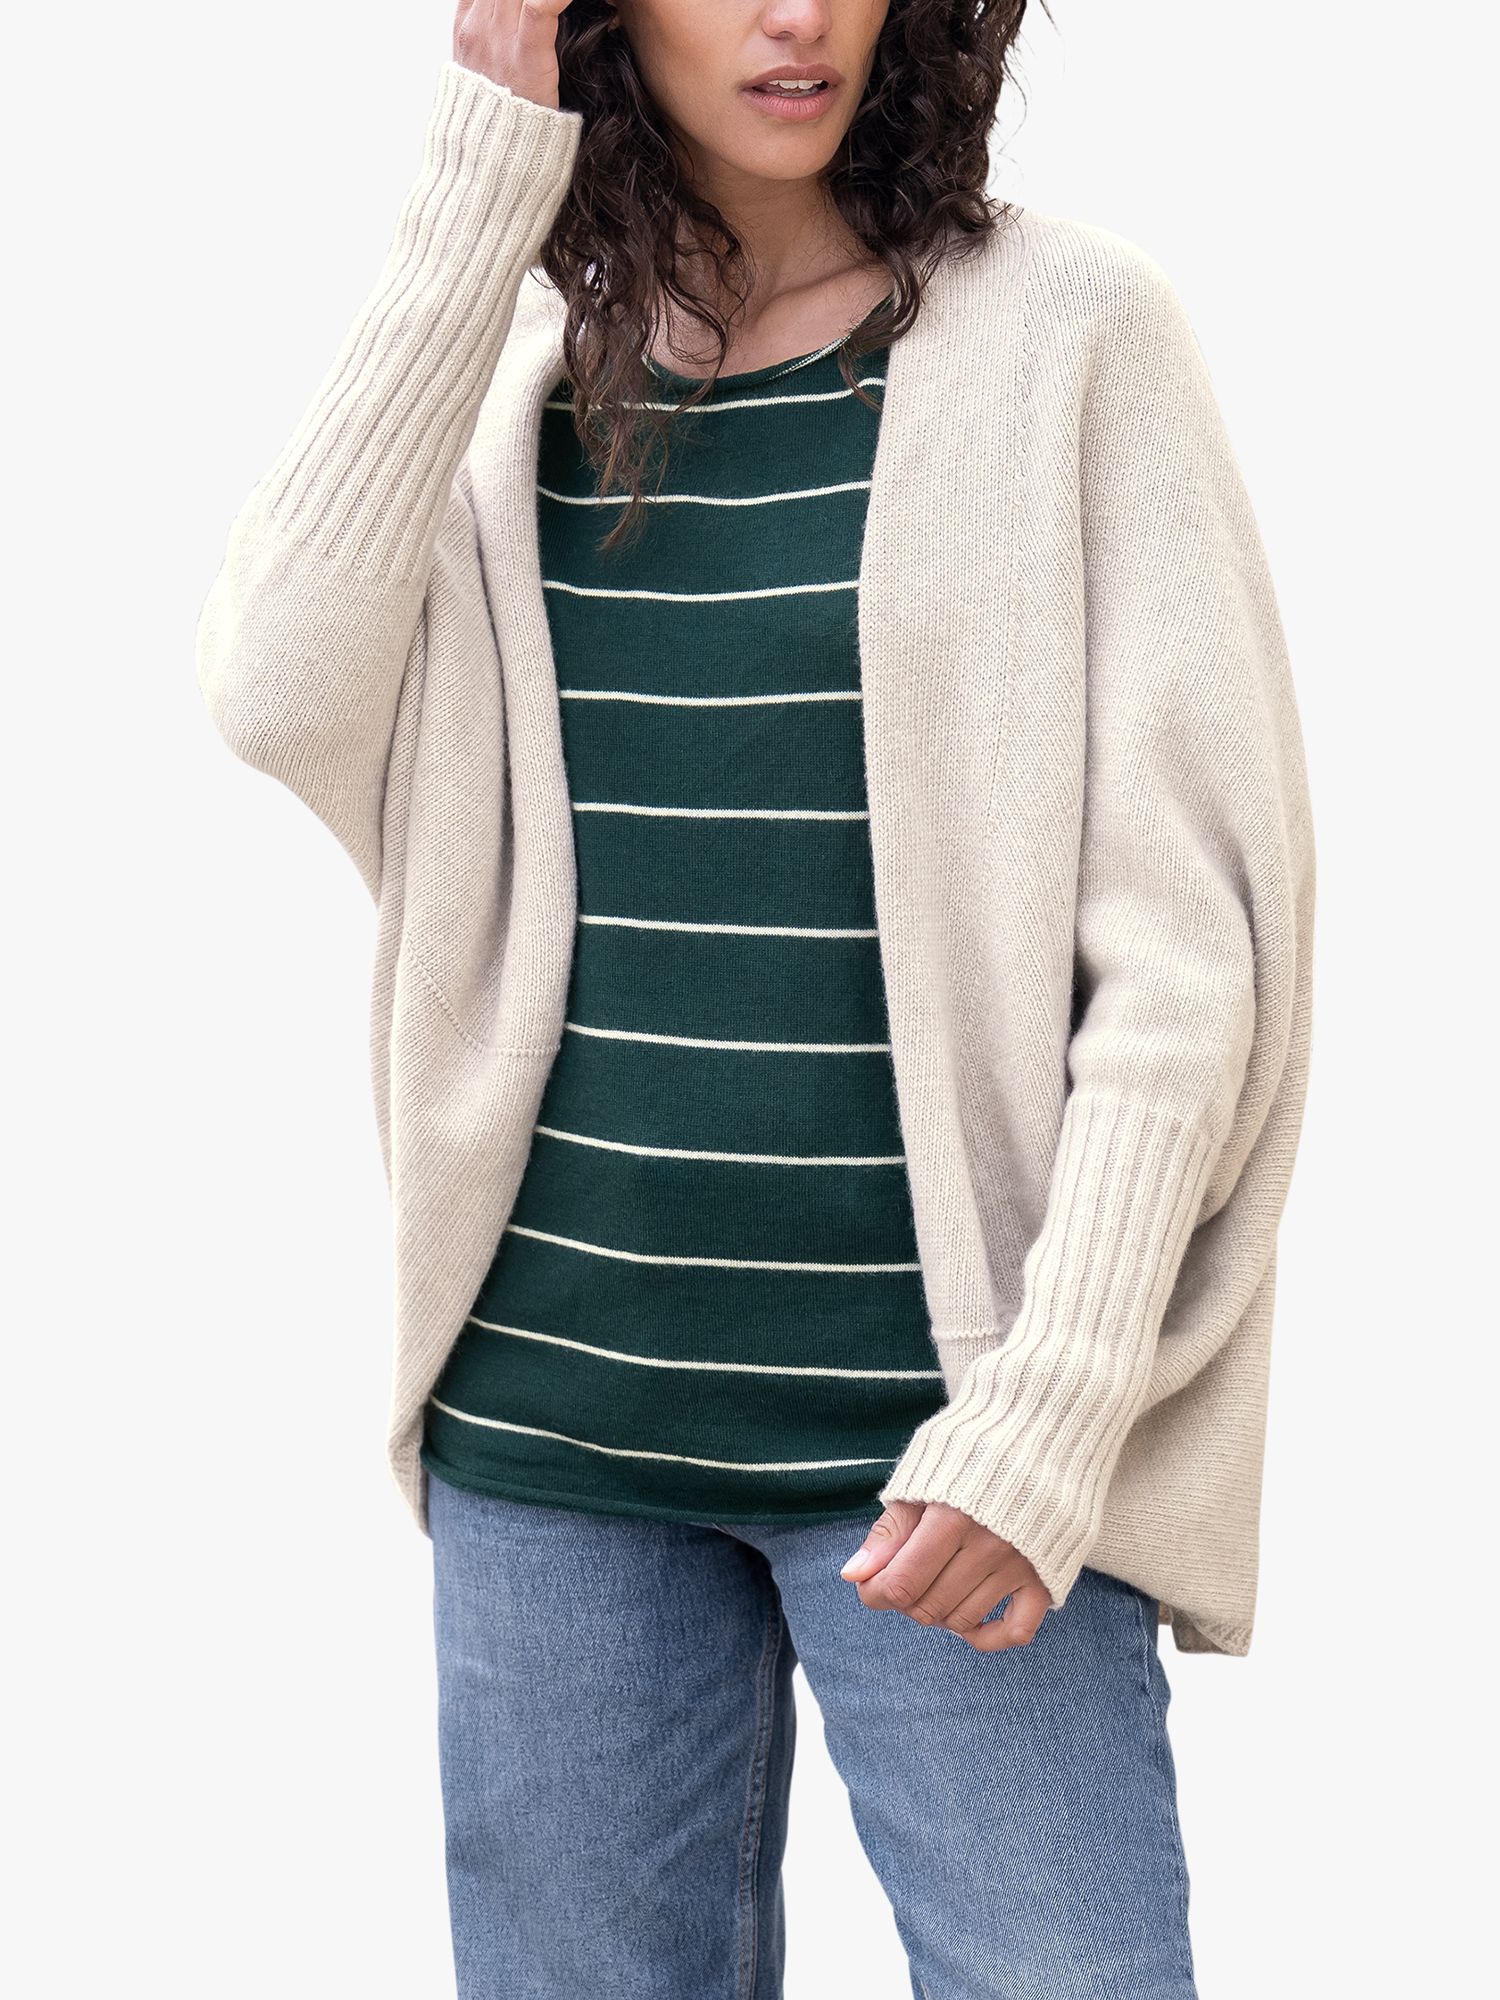 Celtic & Co. Cocoon Lambswool Cardigan, Oatmeal, XS-S